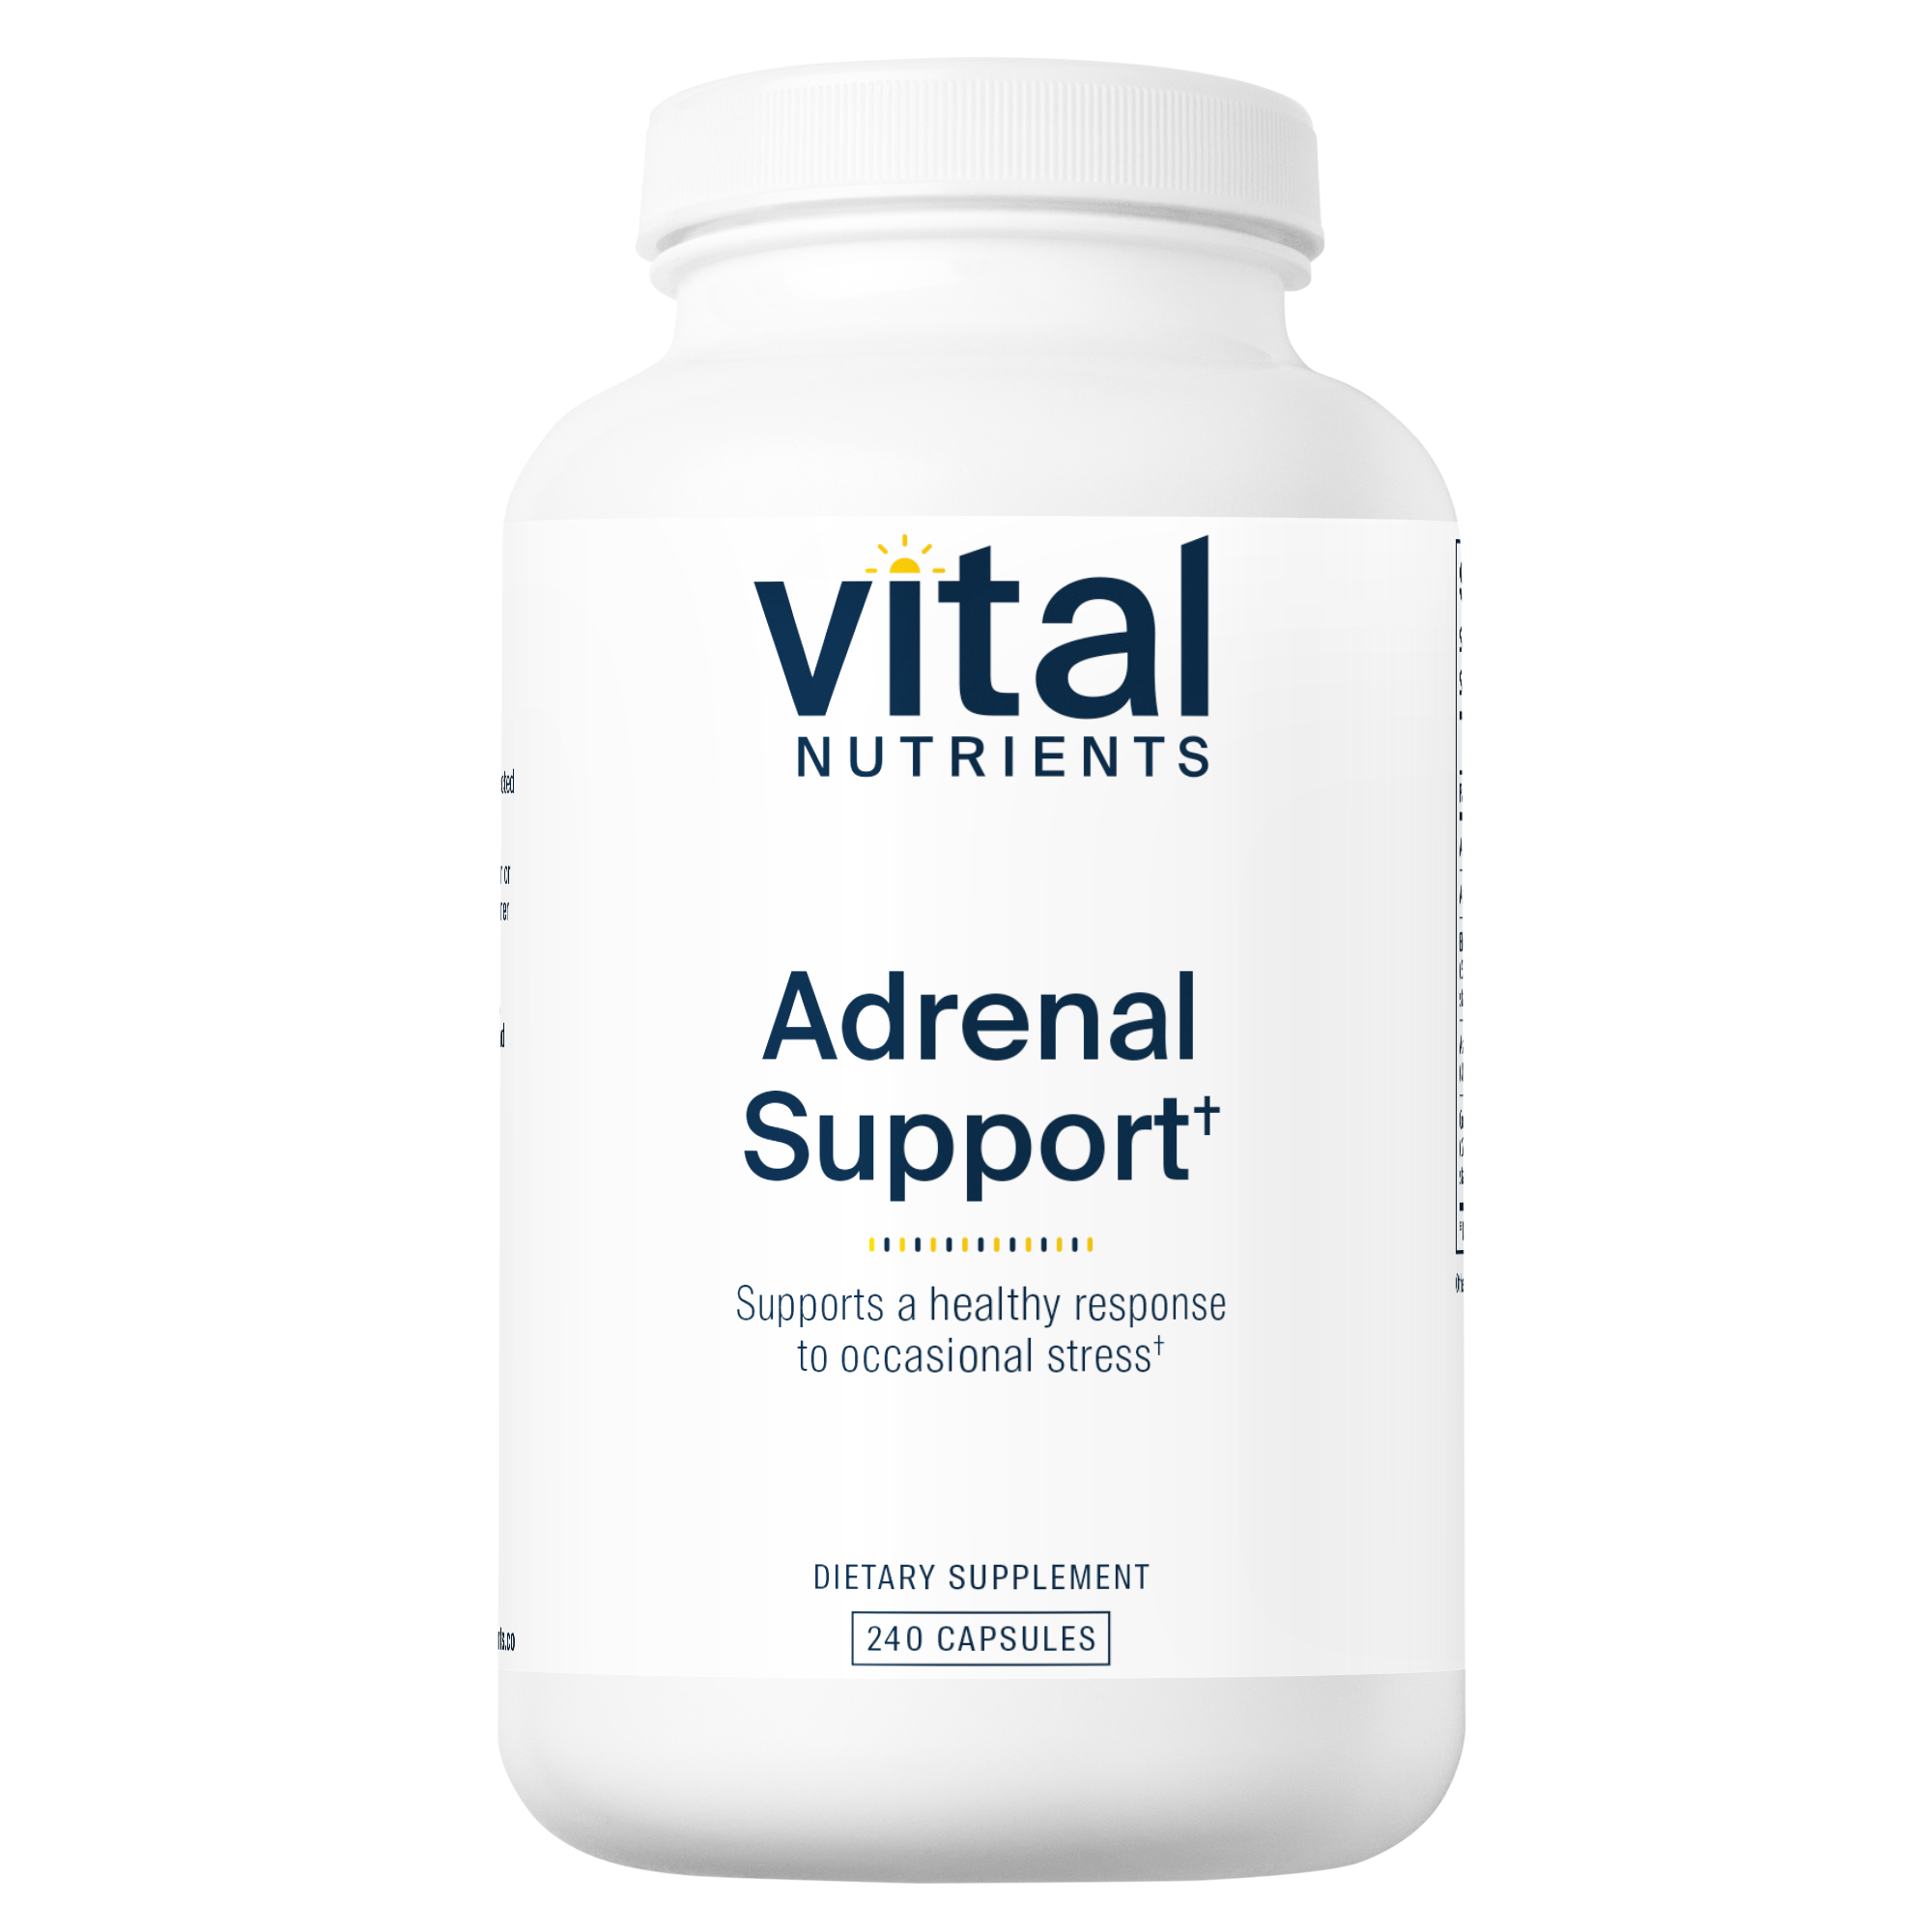 Adrenal Support*